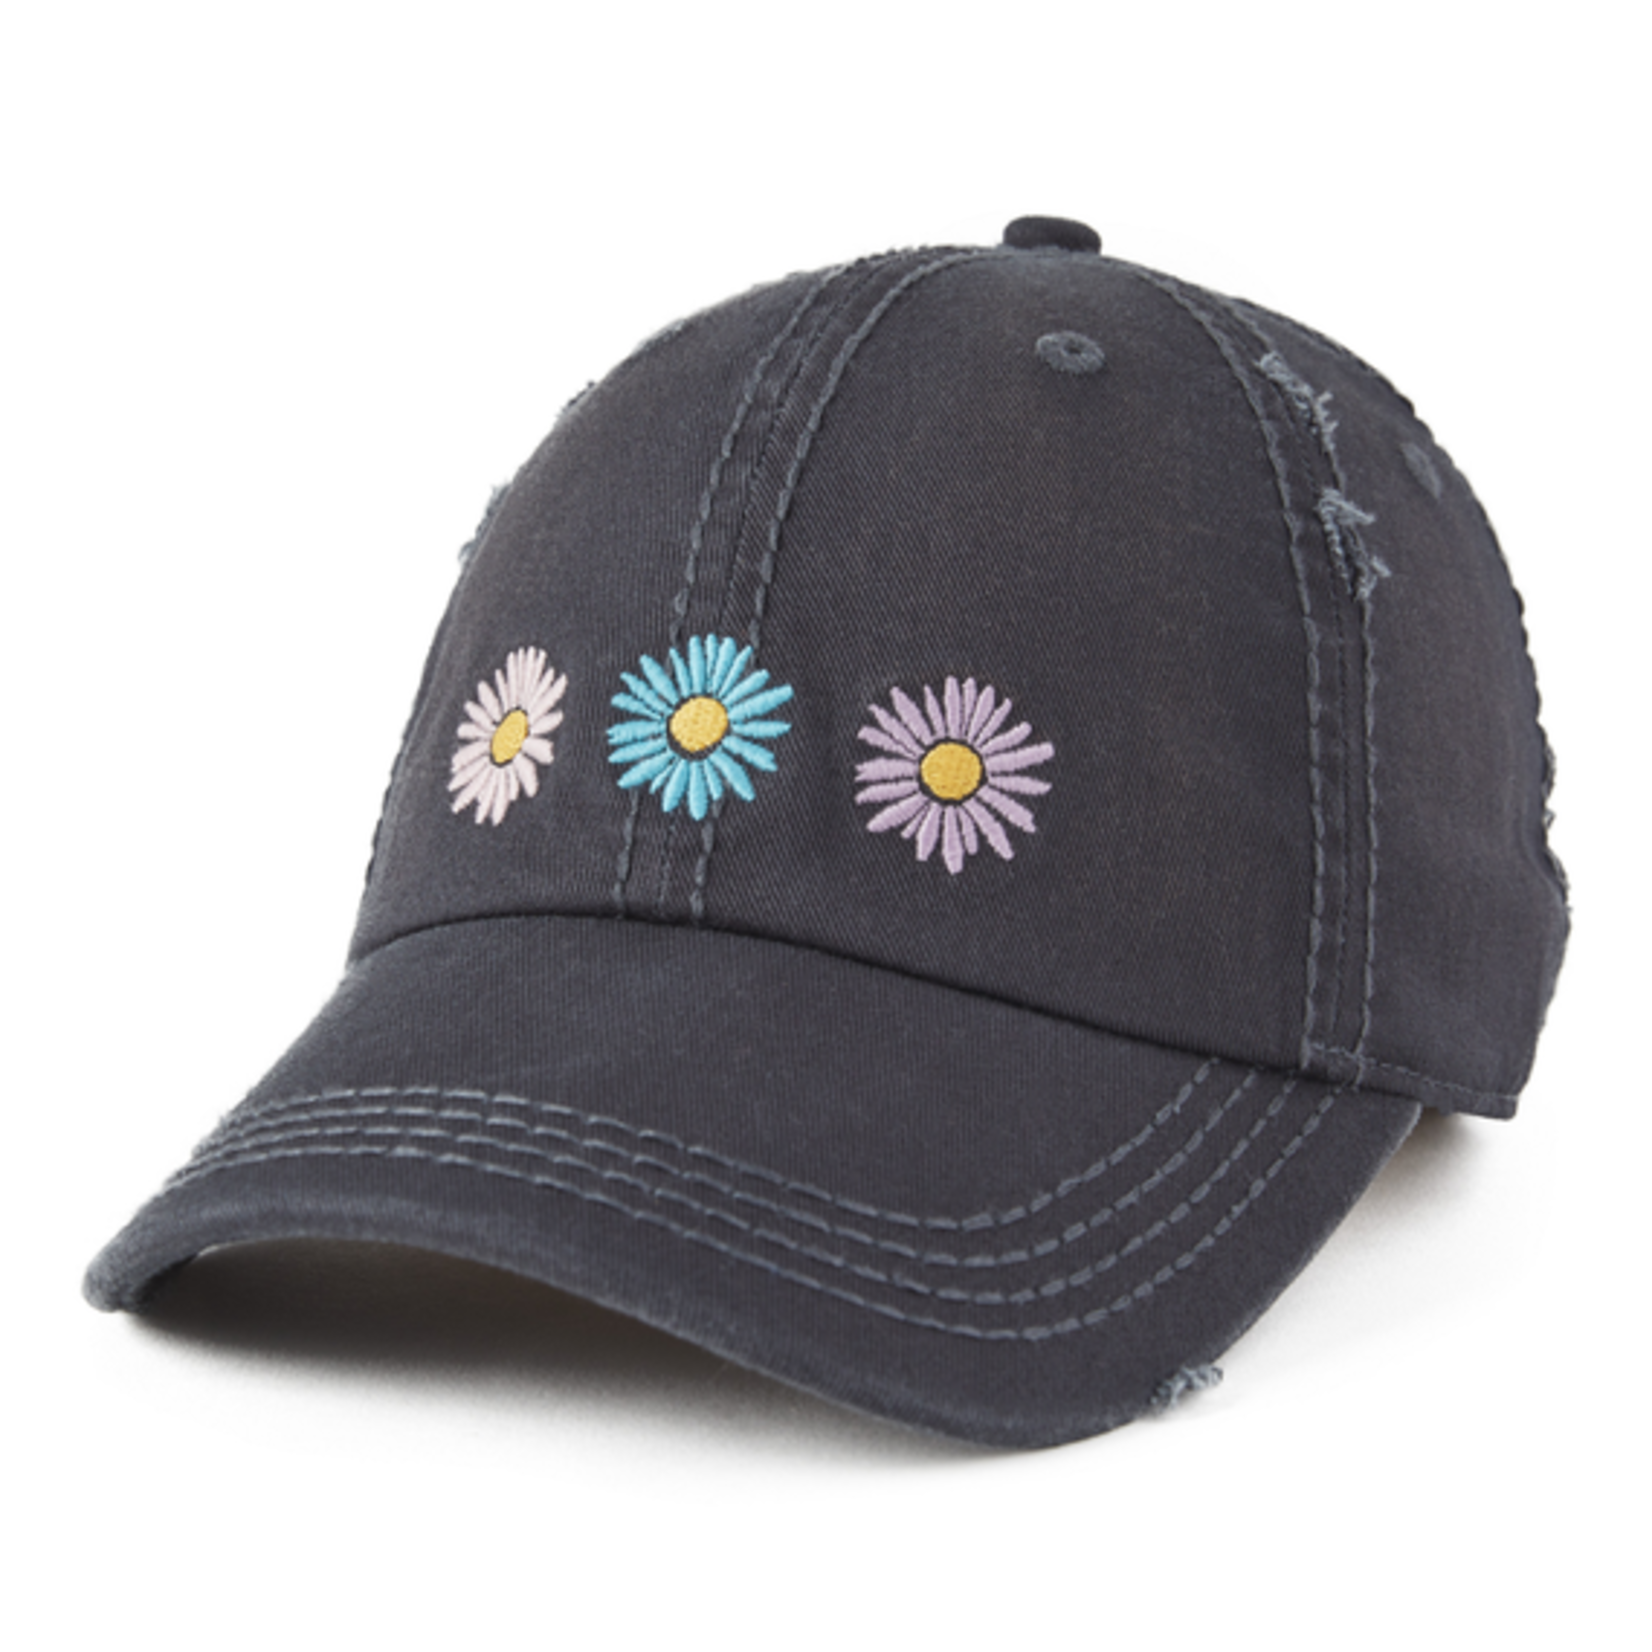 Life is Good Three Daisies Sunwashed Chill Cap